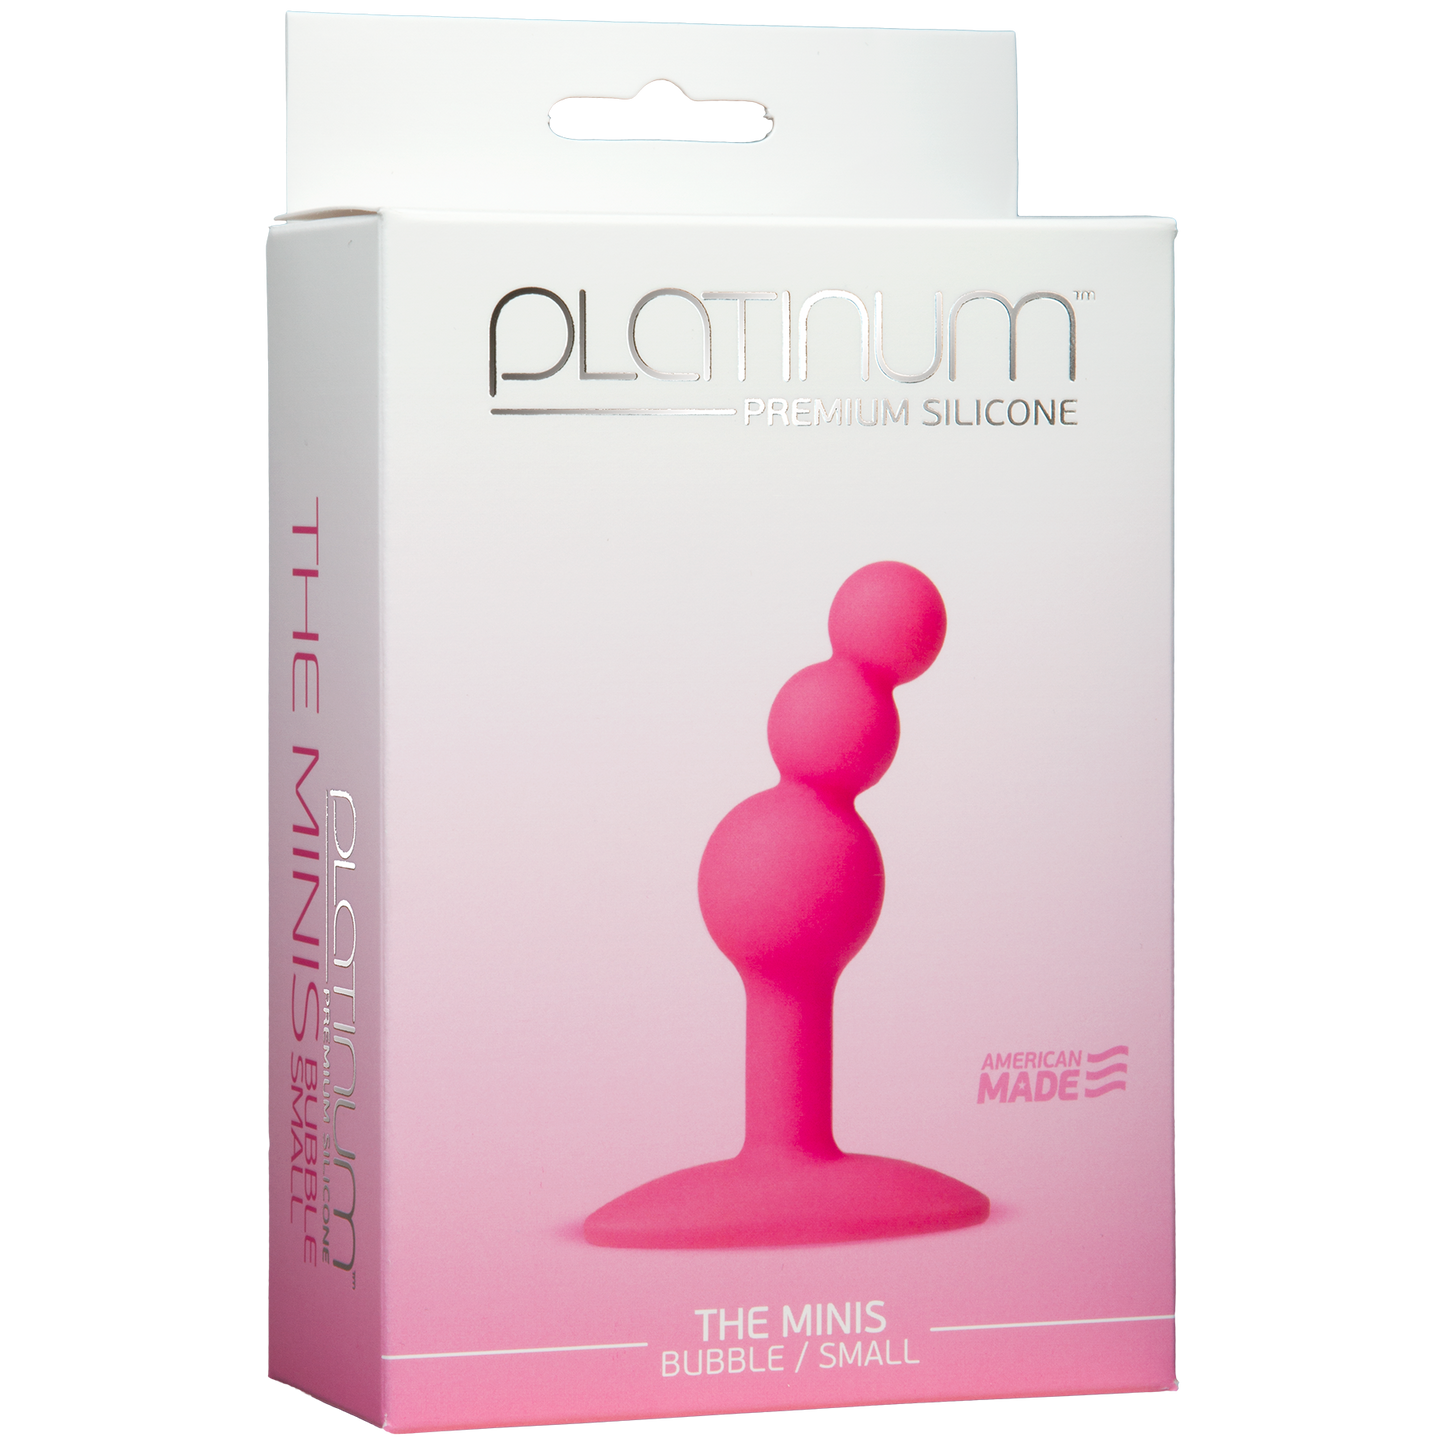 Platinum Premium Silicone The Mini's Bubble - Small, Pink - Thorn & Feather Sex Toy Canada